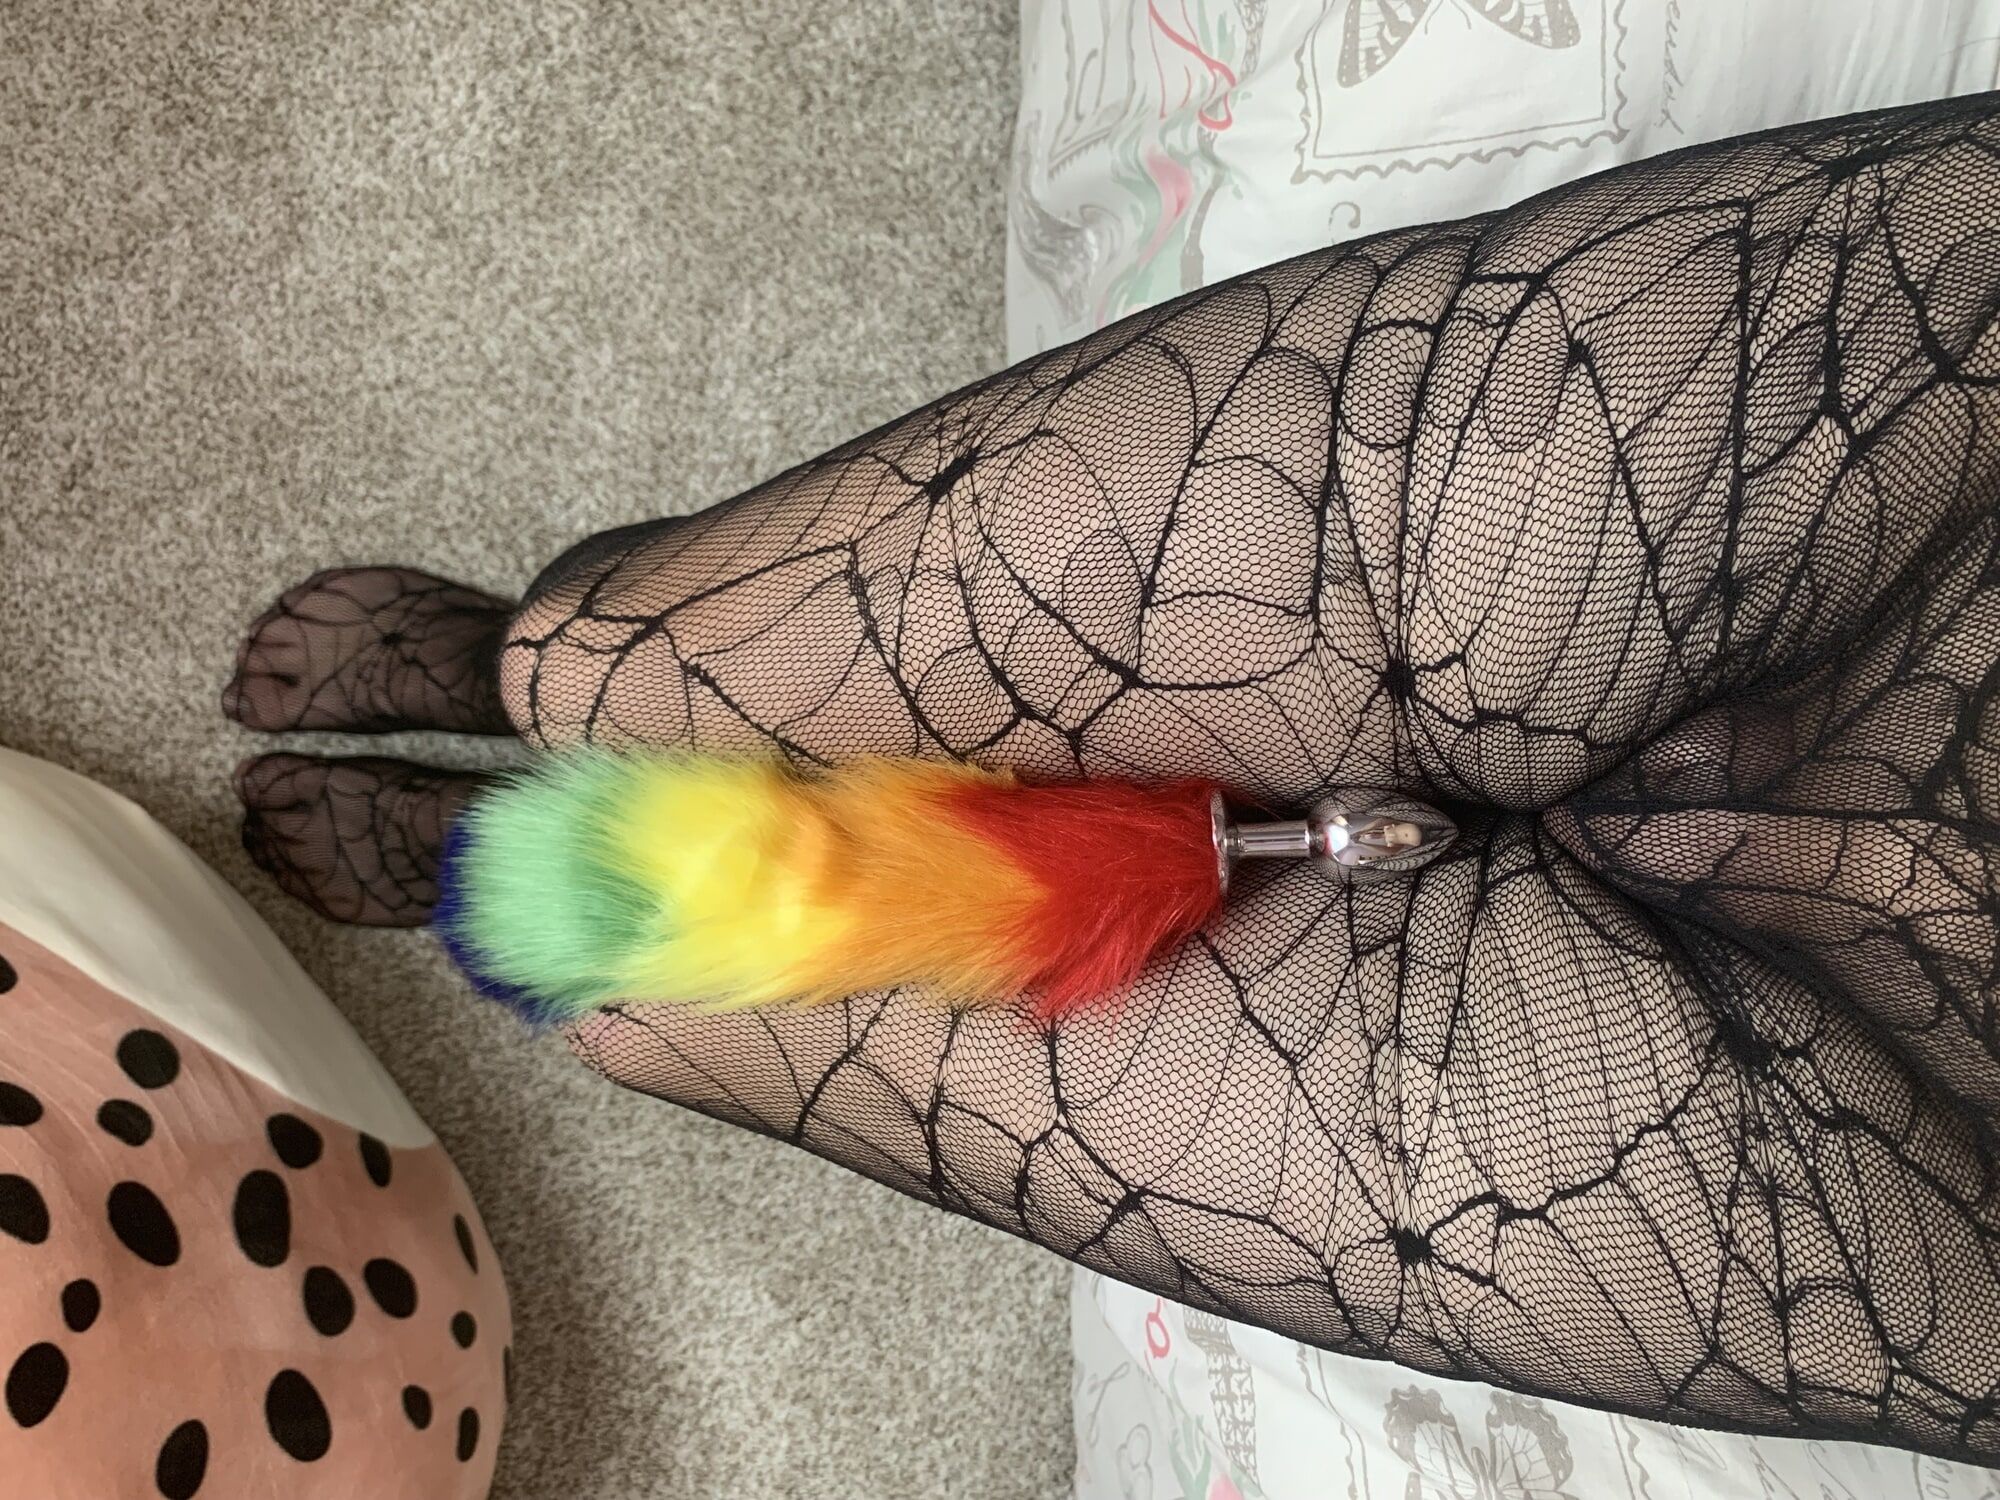 My new buttplug tail #10